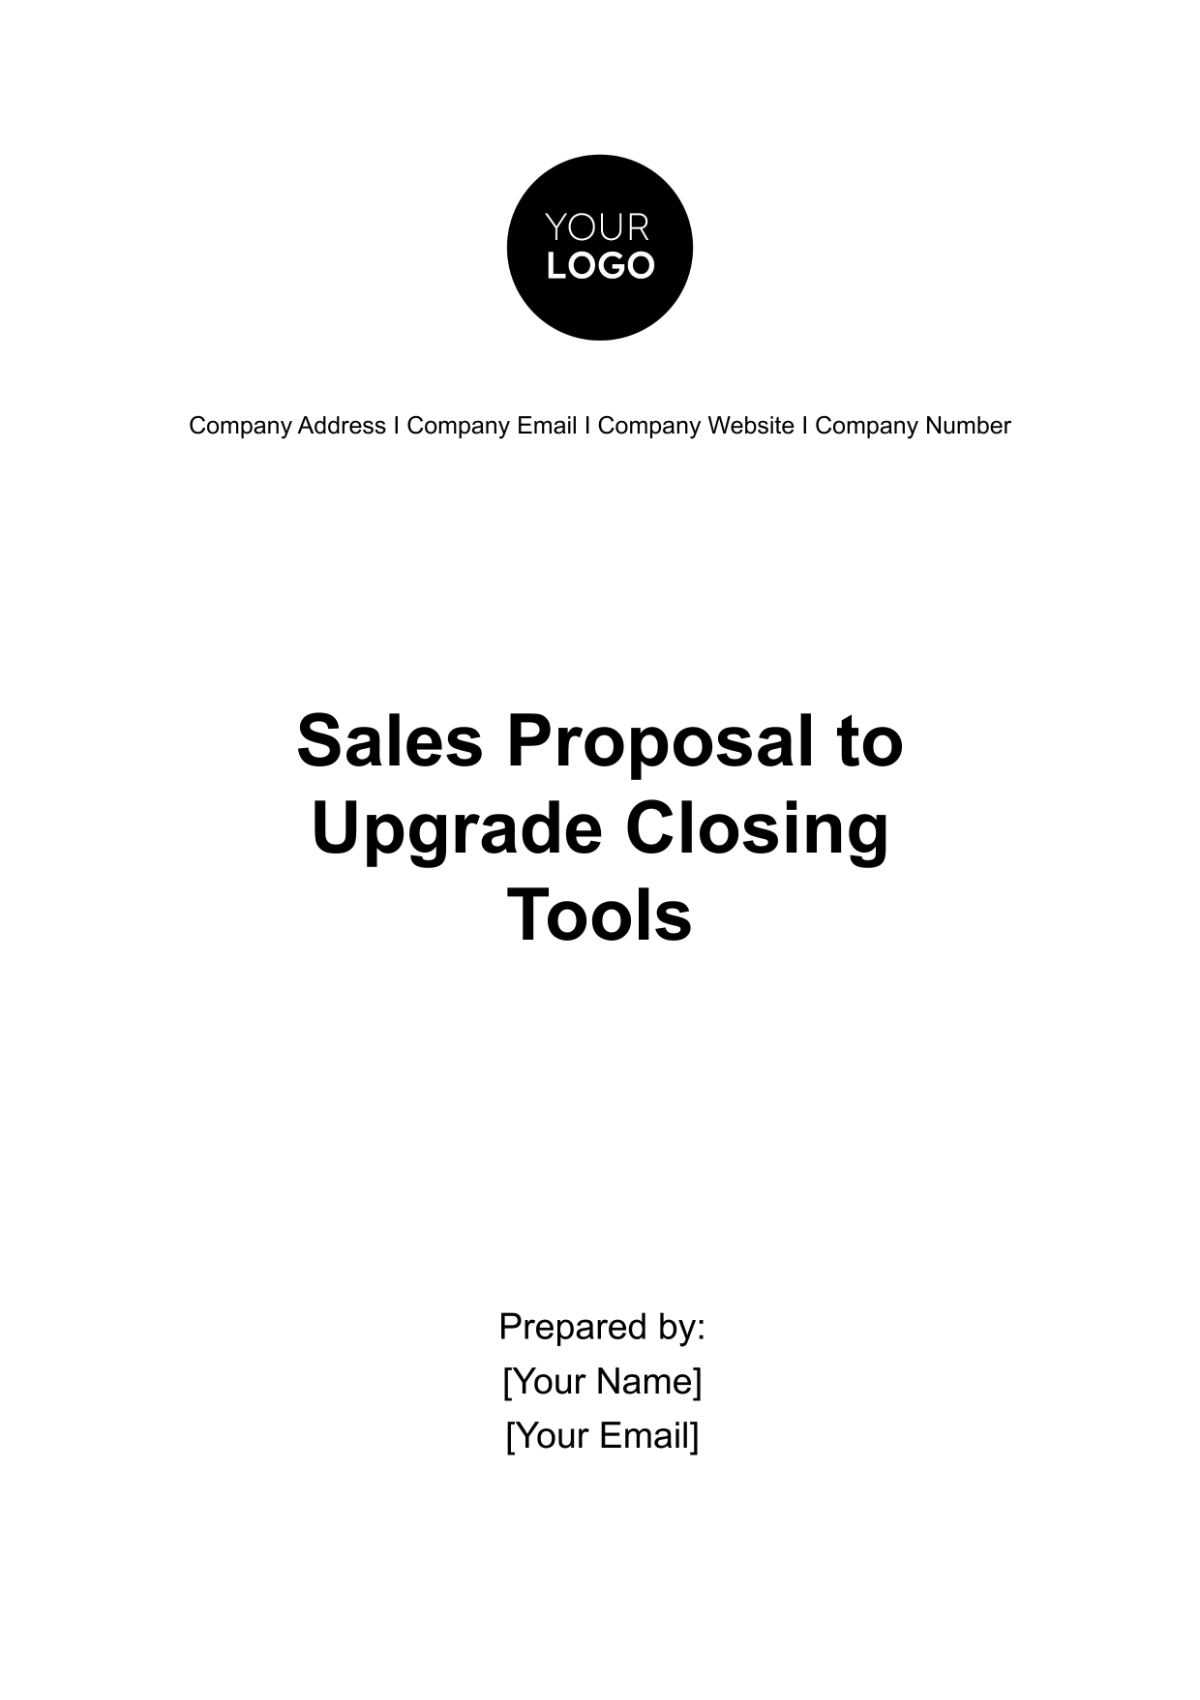 Sales Proposal to Upgrade Closing Tools Template